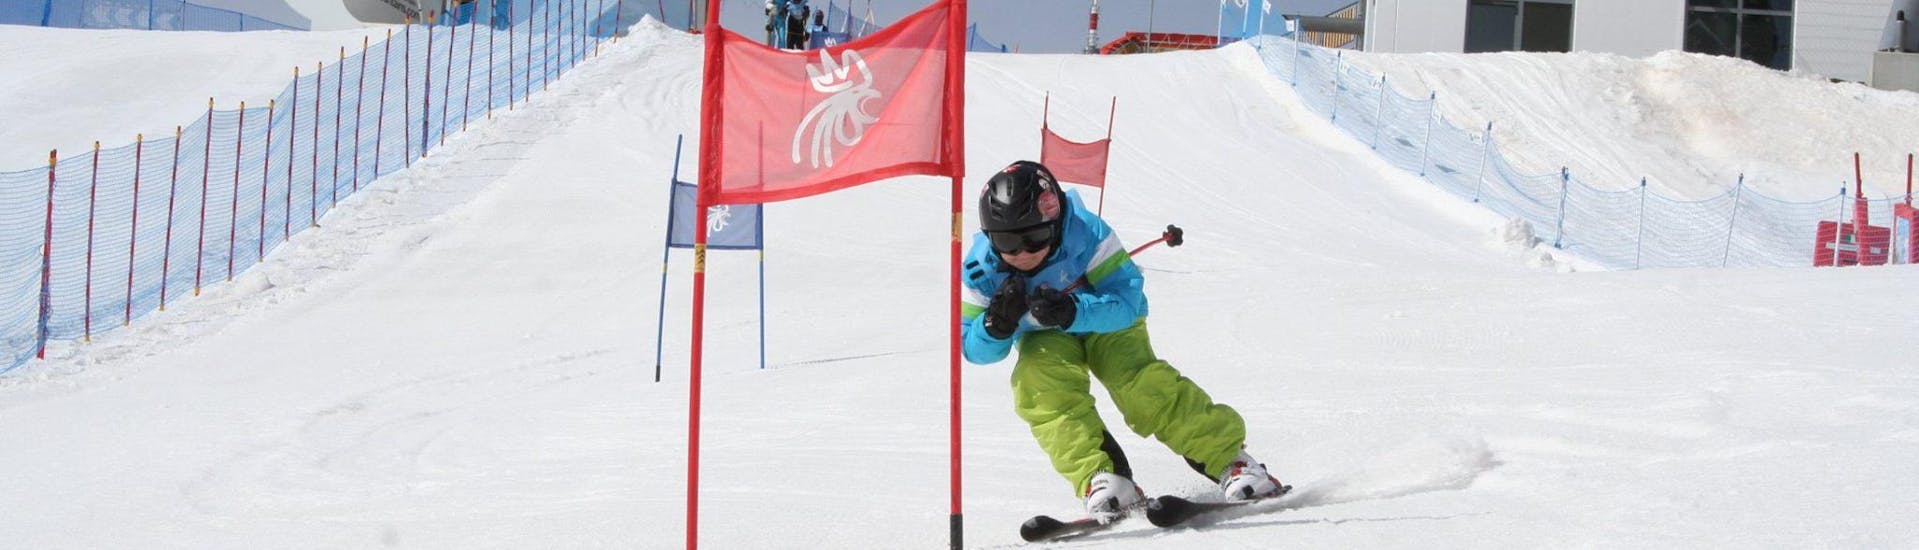 Kids Ski Lessons (9-13 y.) for Advanced - Full Day with Kronschool Valdaora - Hero image